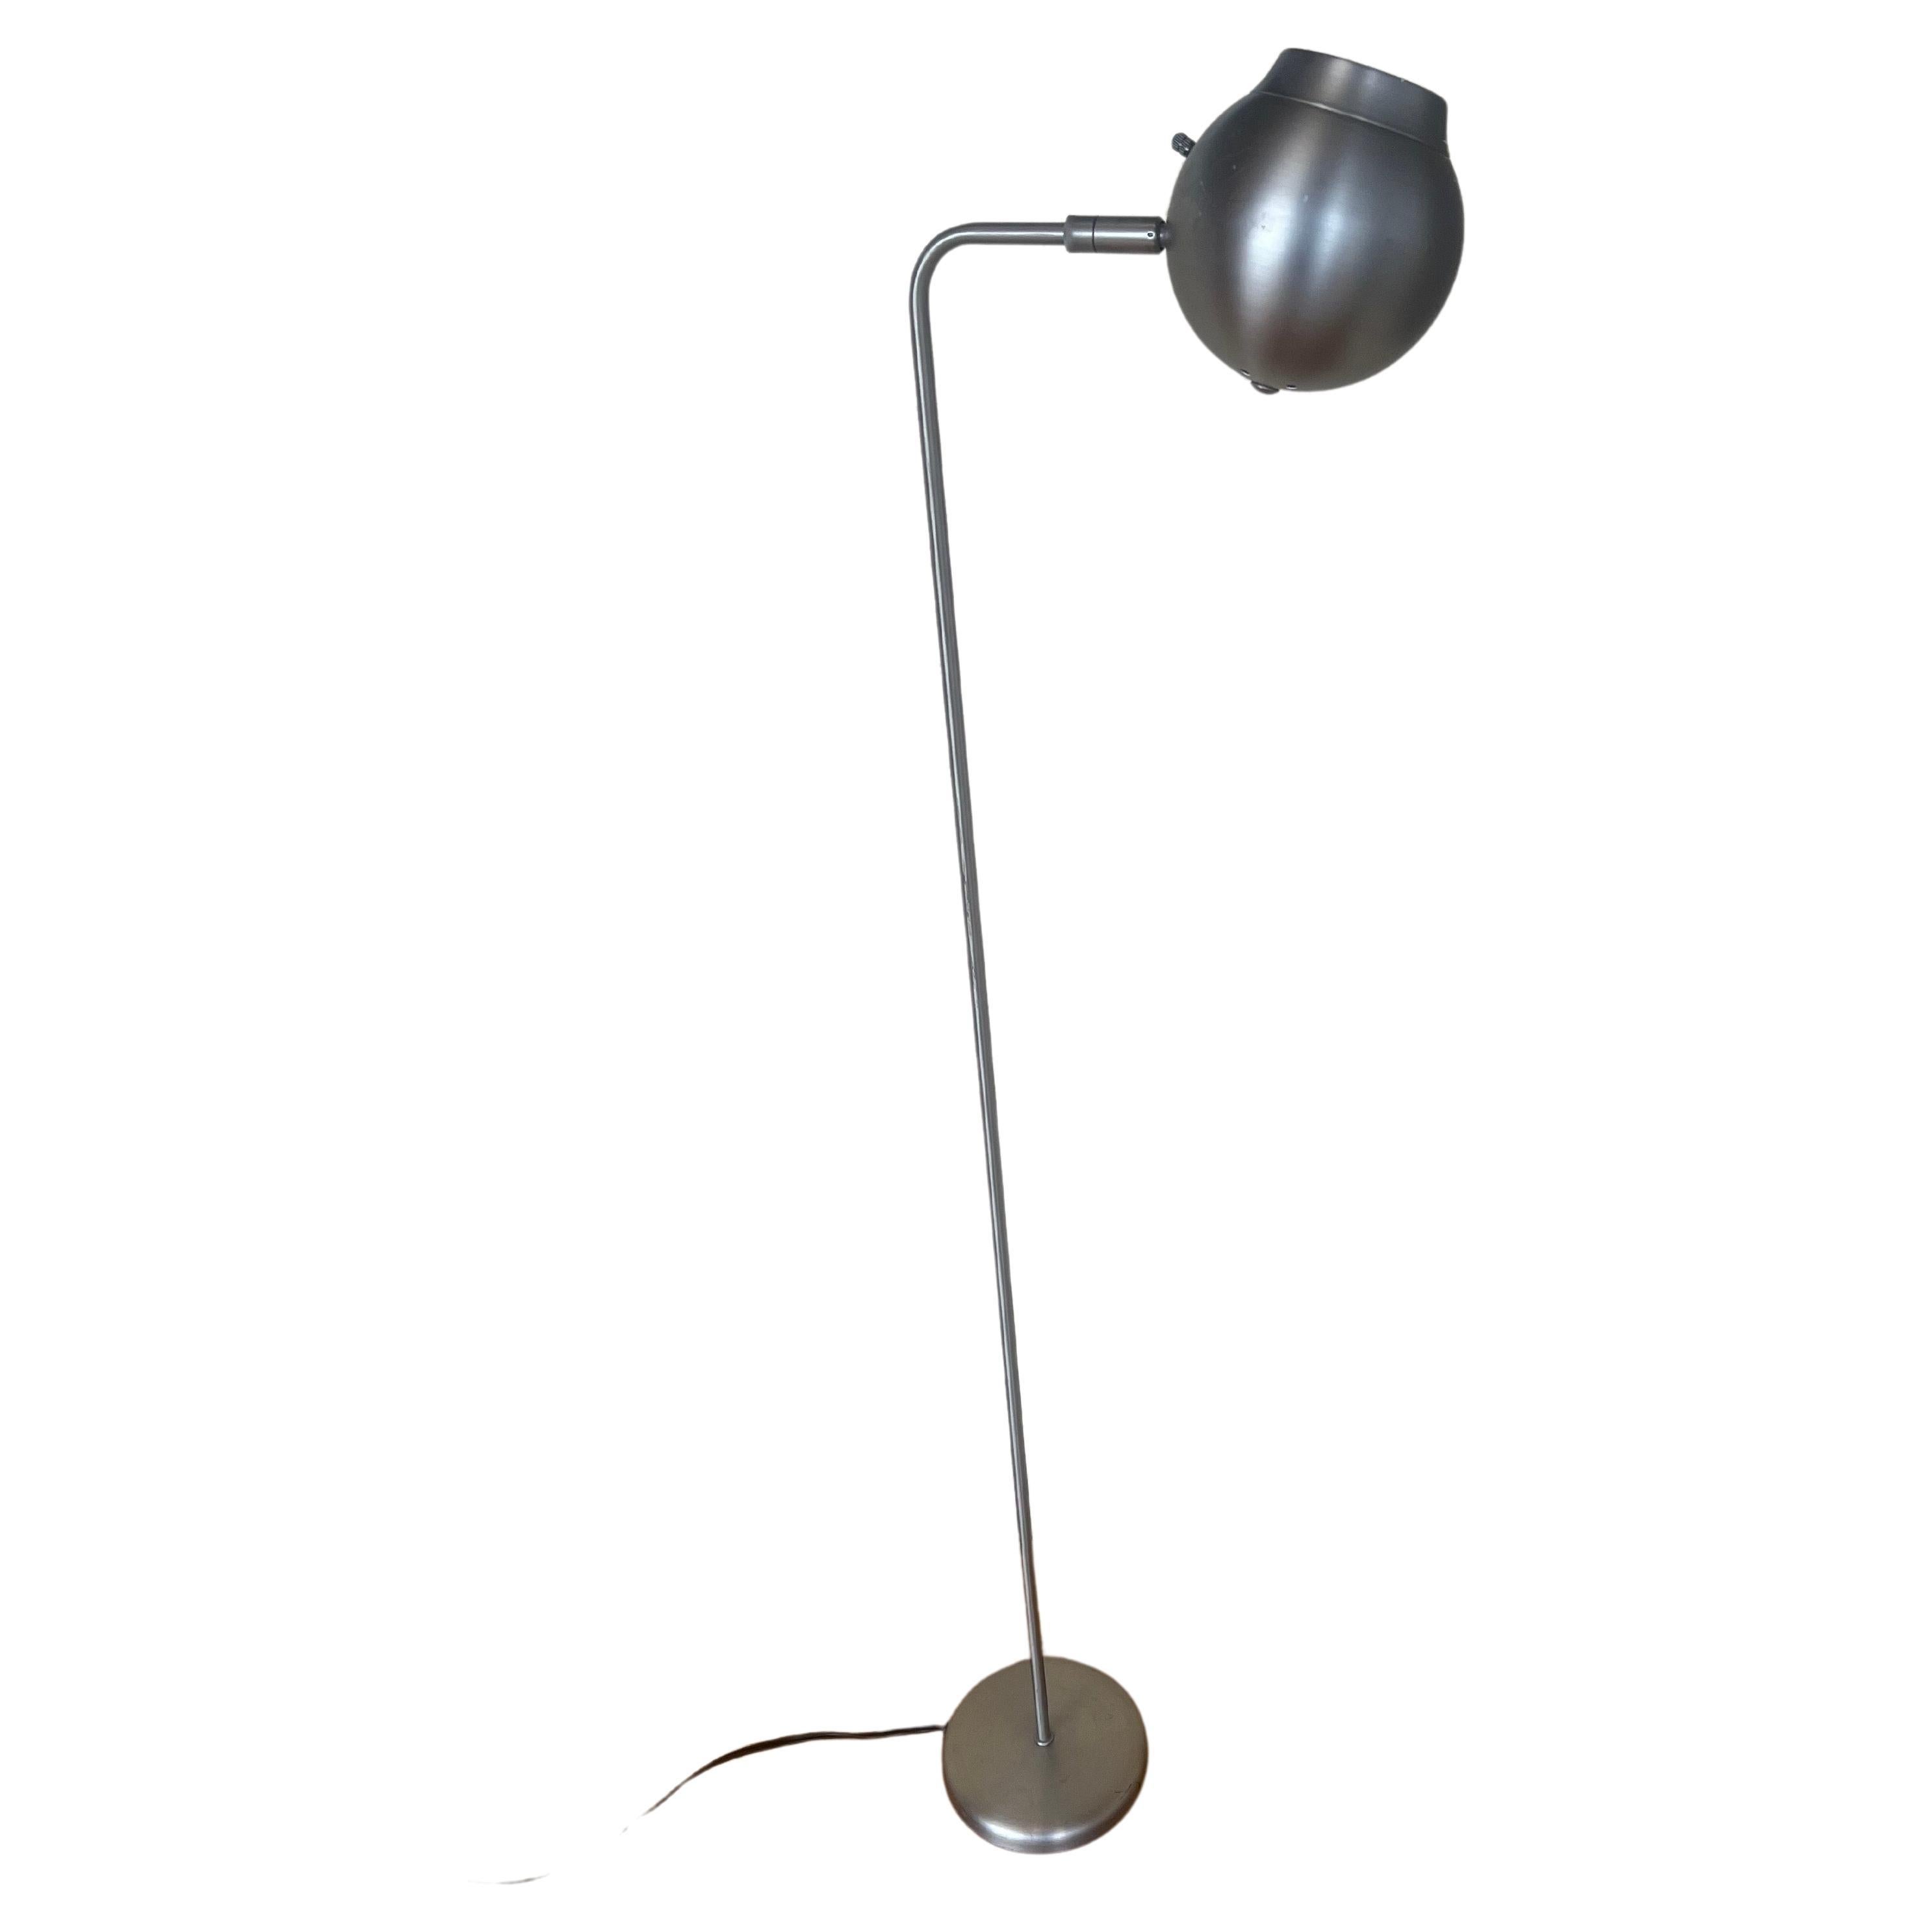 Space age brushed steel finish , multidirectional head floor lamp great for reading goes perfect with mid century , postmodern space age decor.